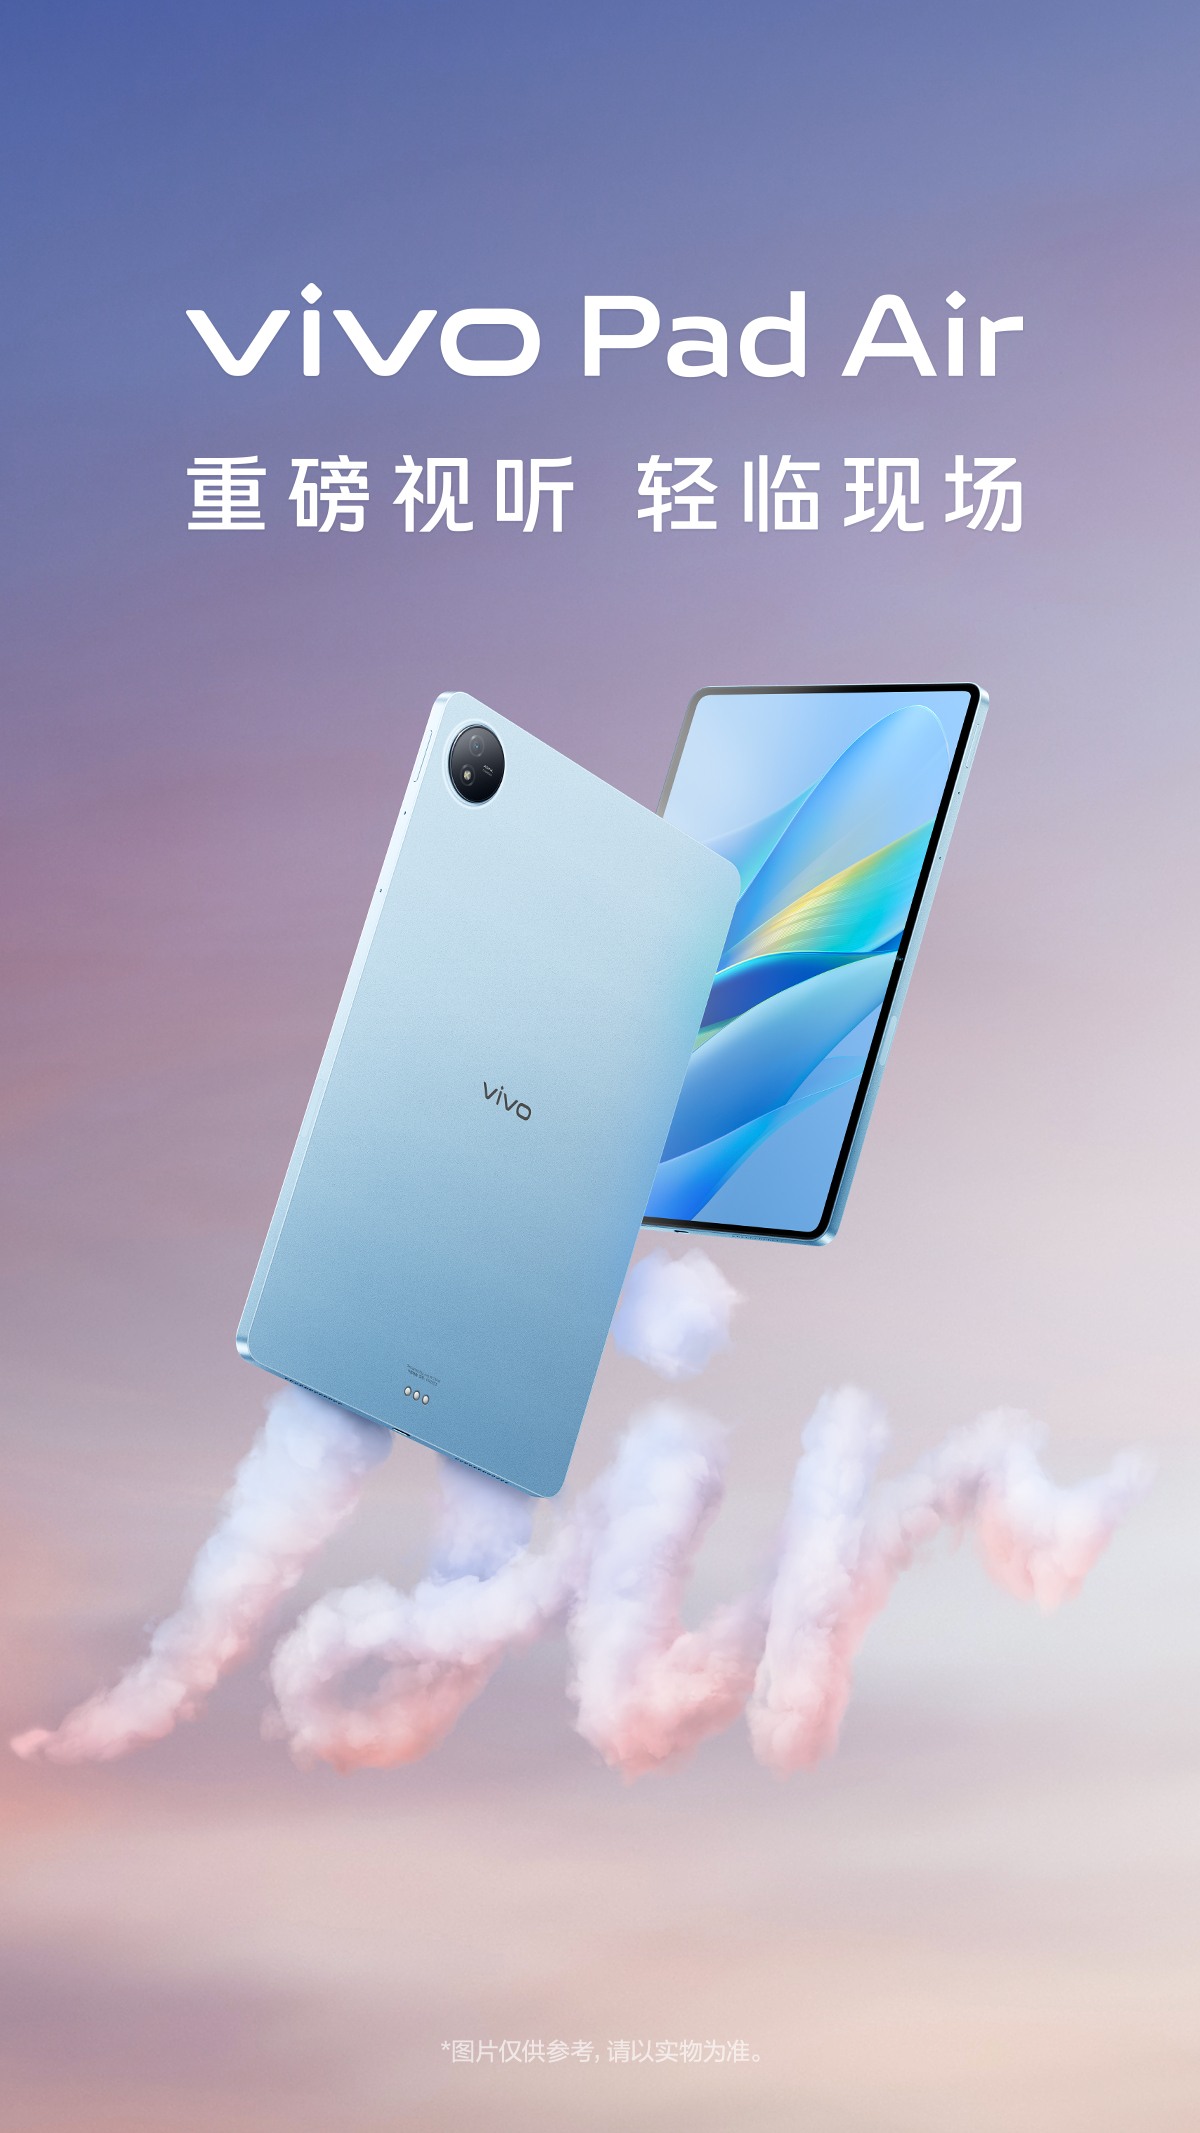 vivo Pad Air design and specs revealed by company exec